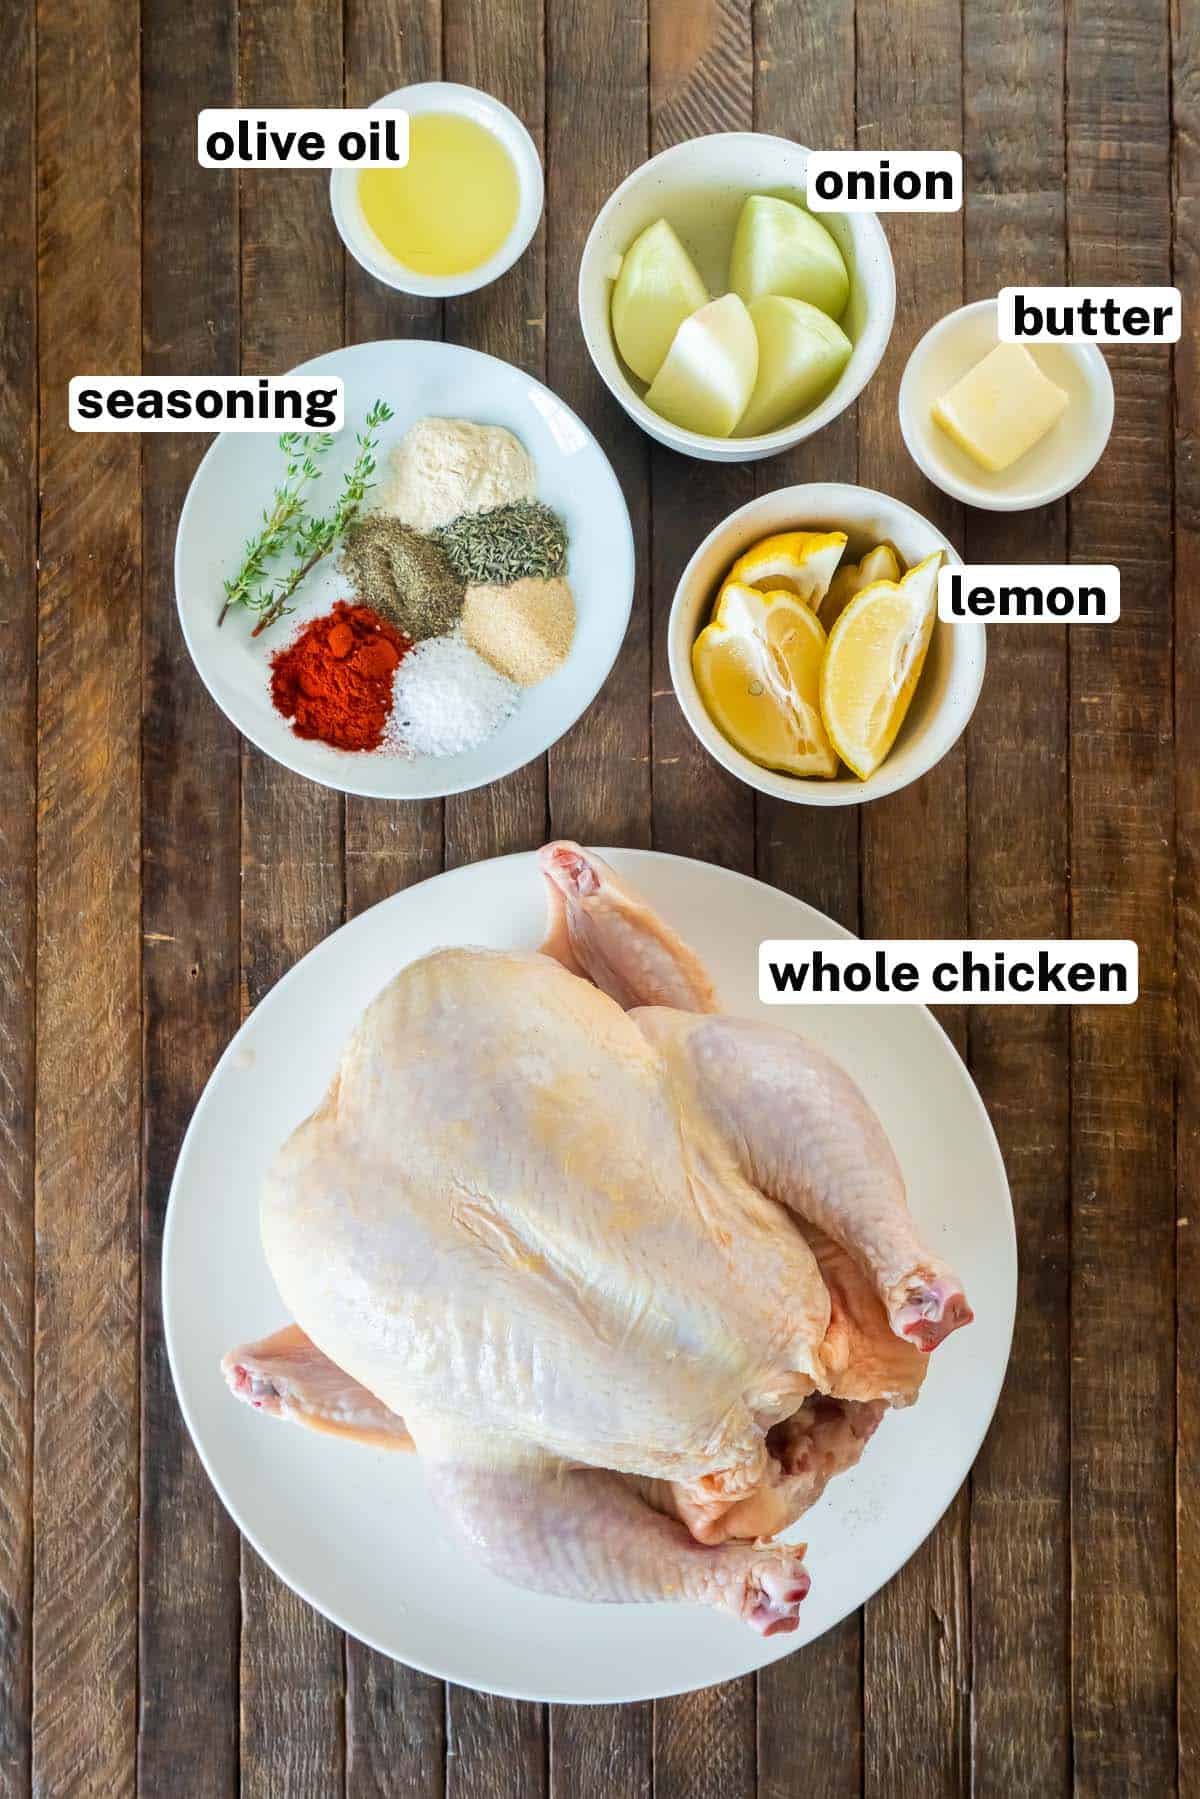 A whole chicken, seasoning, lemon wedges, onion, and oil on a wood surface with text.